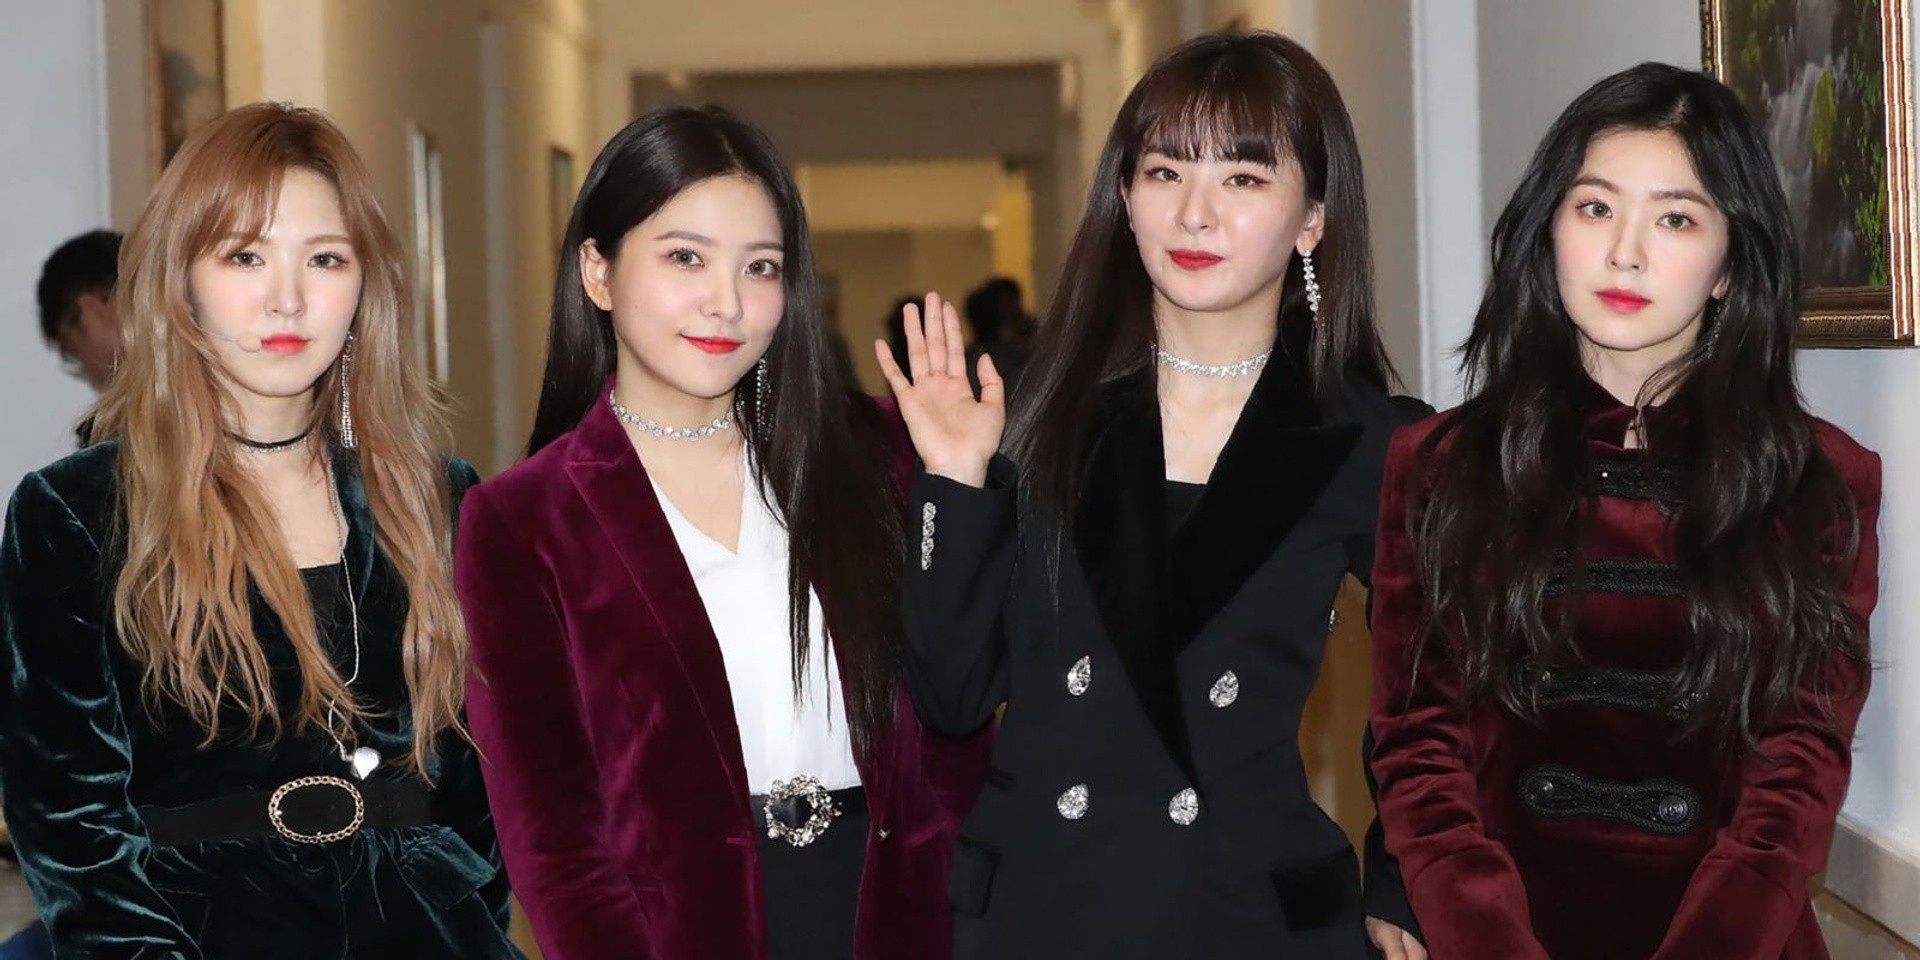 Red Velvet performed for Kim Jong-Un in North Korea and their fans had thoughts